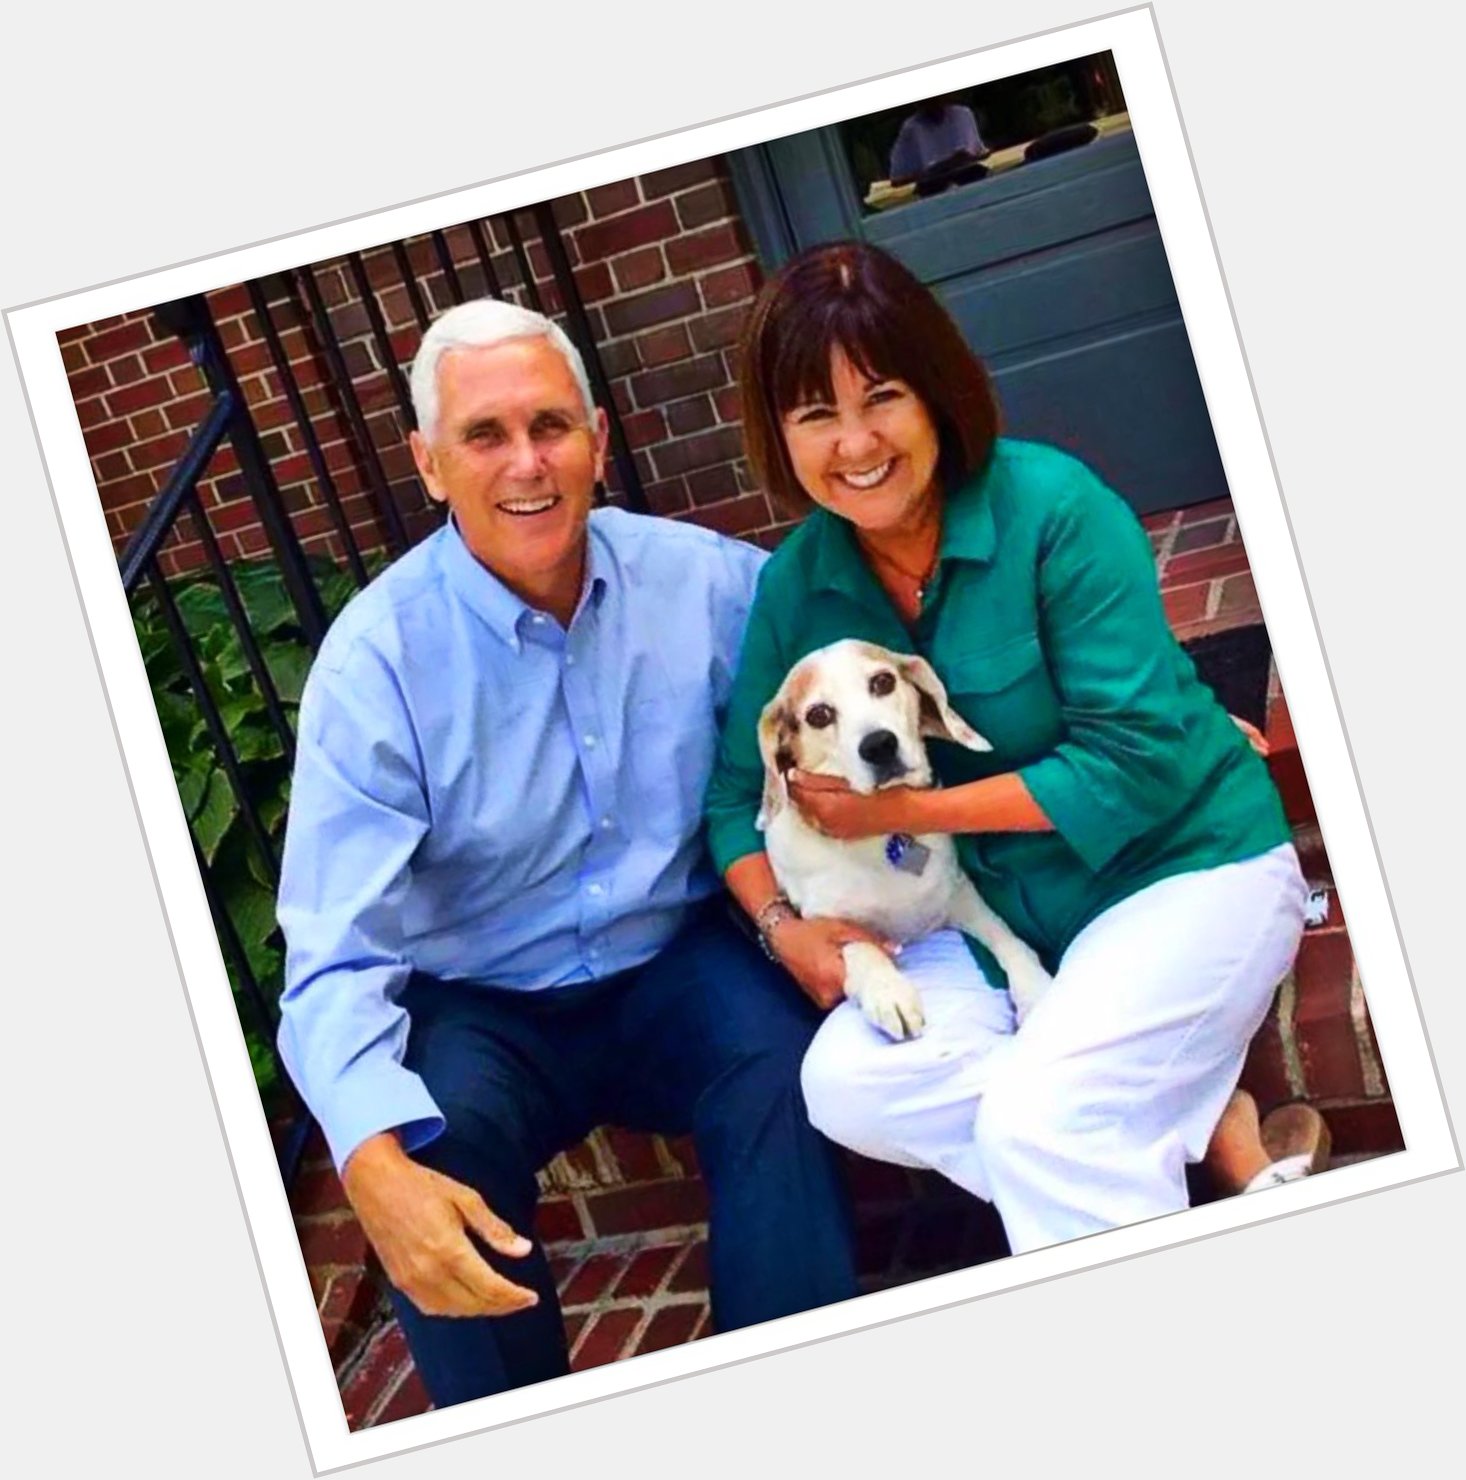 Wishing a very Happy Birthday to our great Vice President Mike Pence 